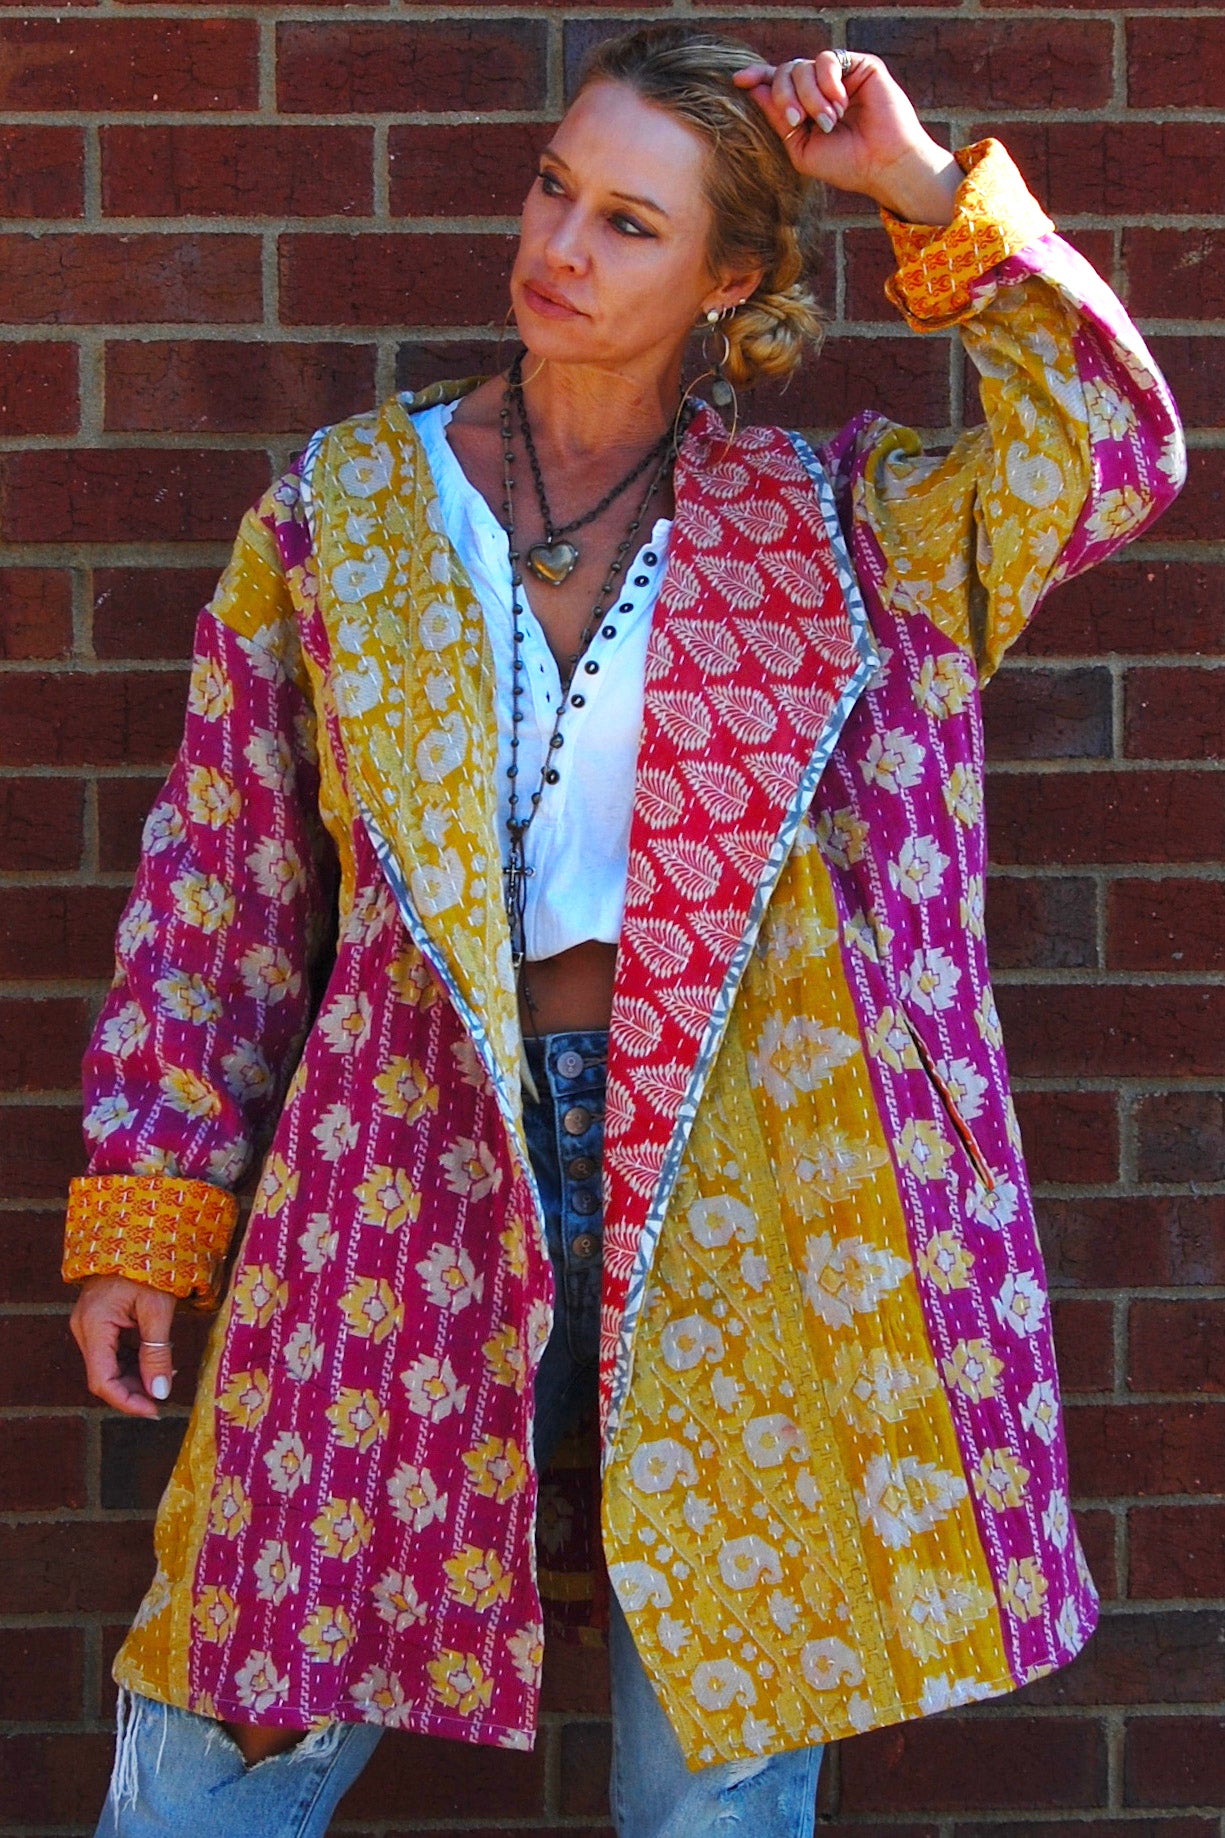 The Dahlia Patchwork Jacket in Apricot - SpiritedBoutiques Boho Hippie Boutique Style Jacket, The Roots